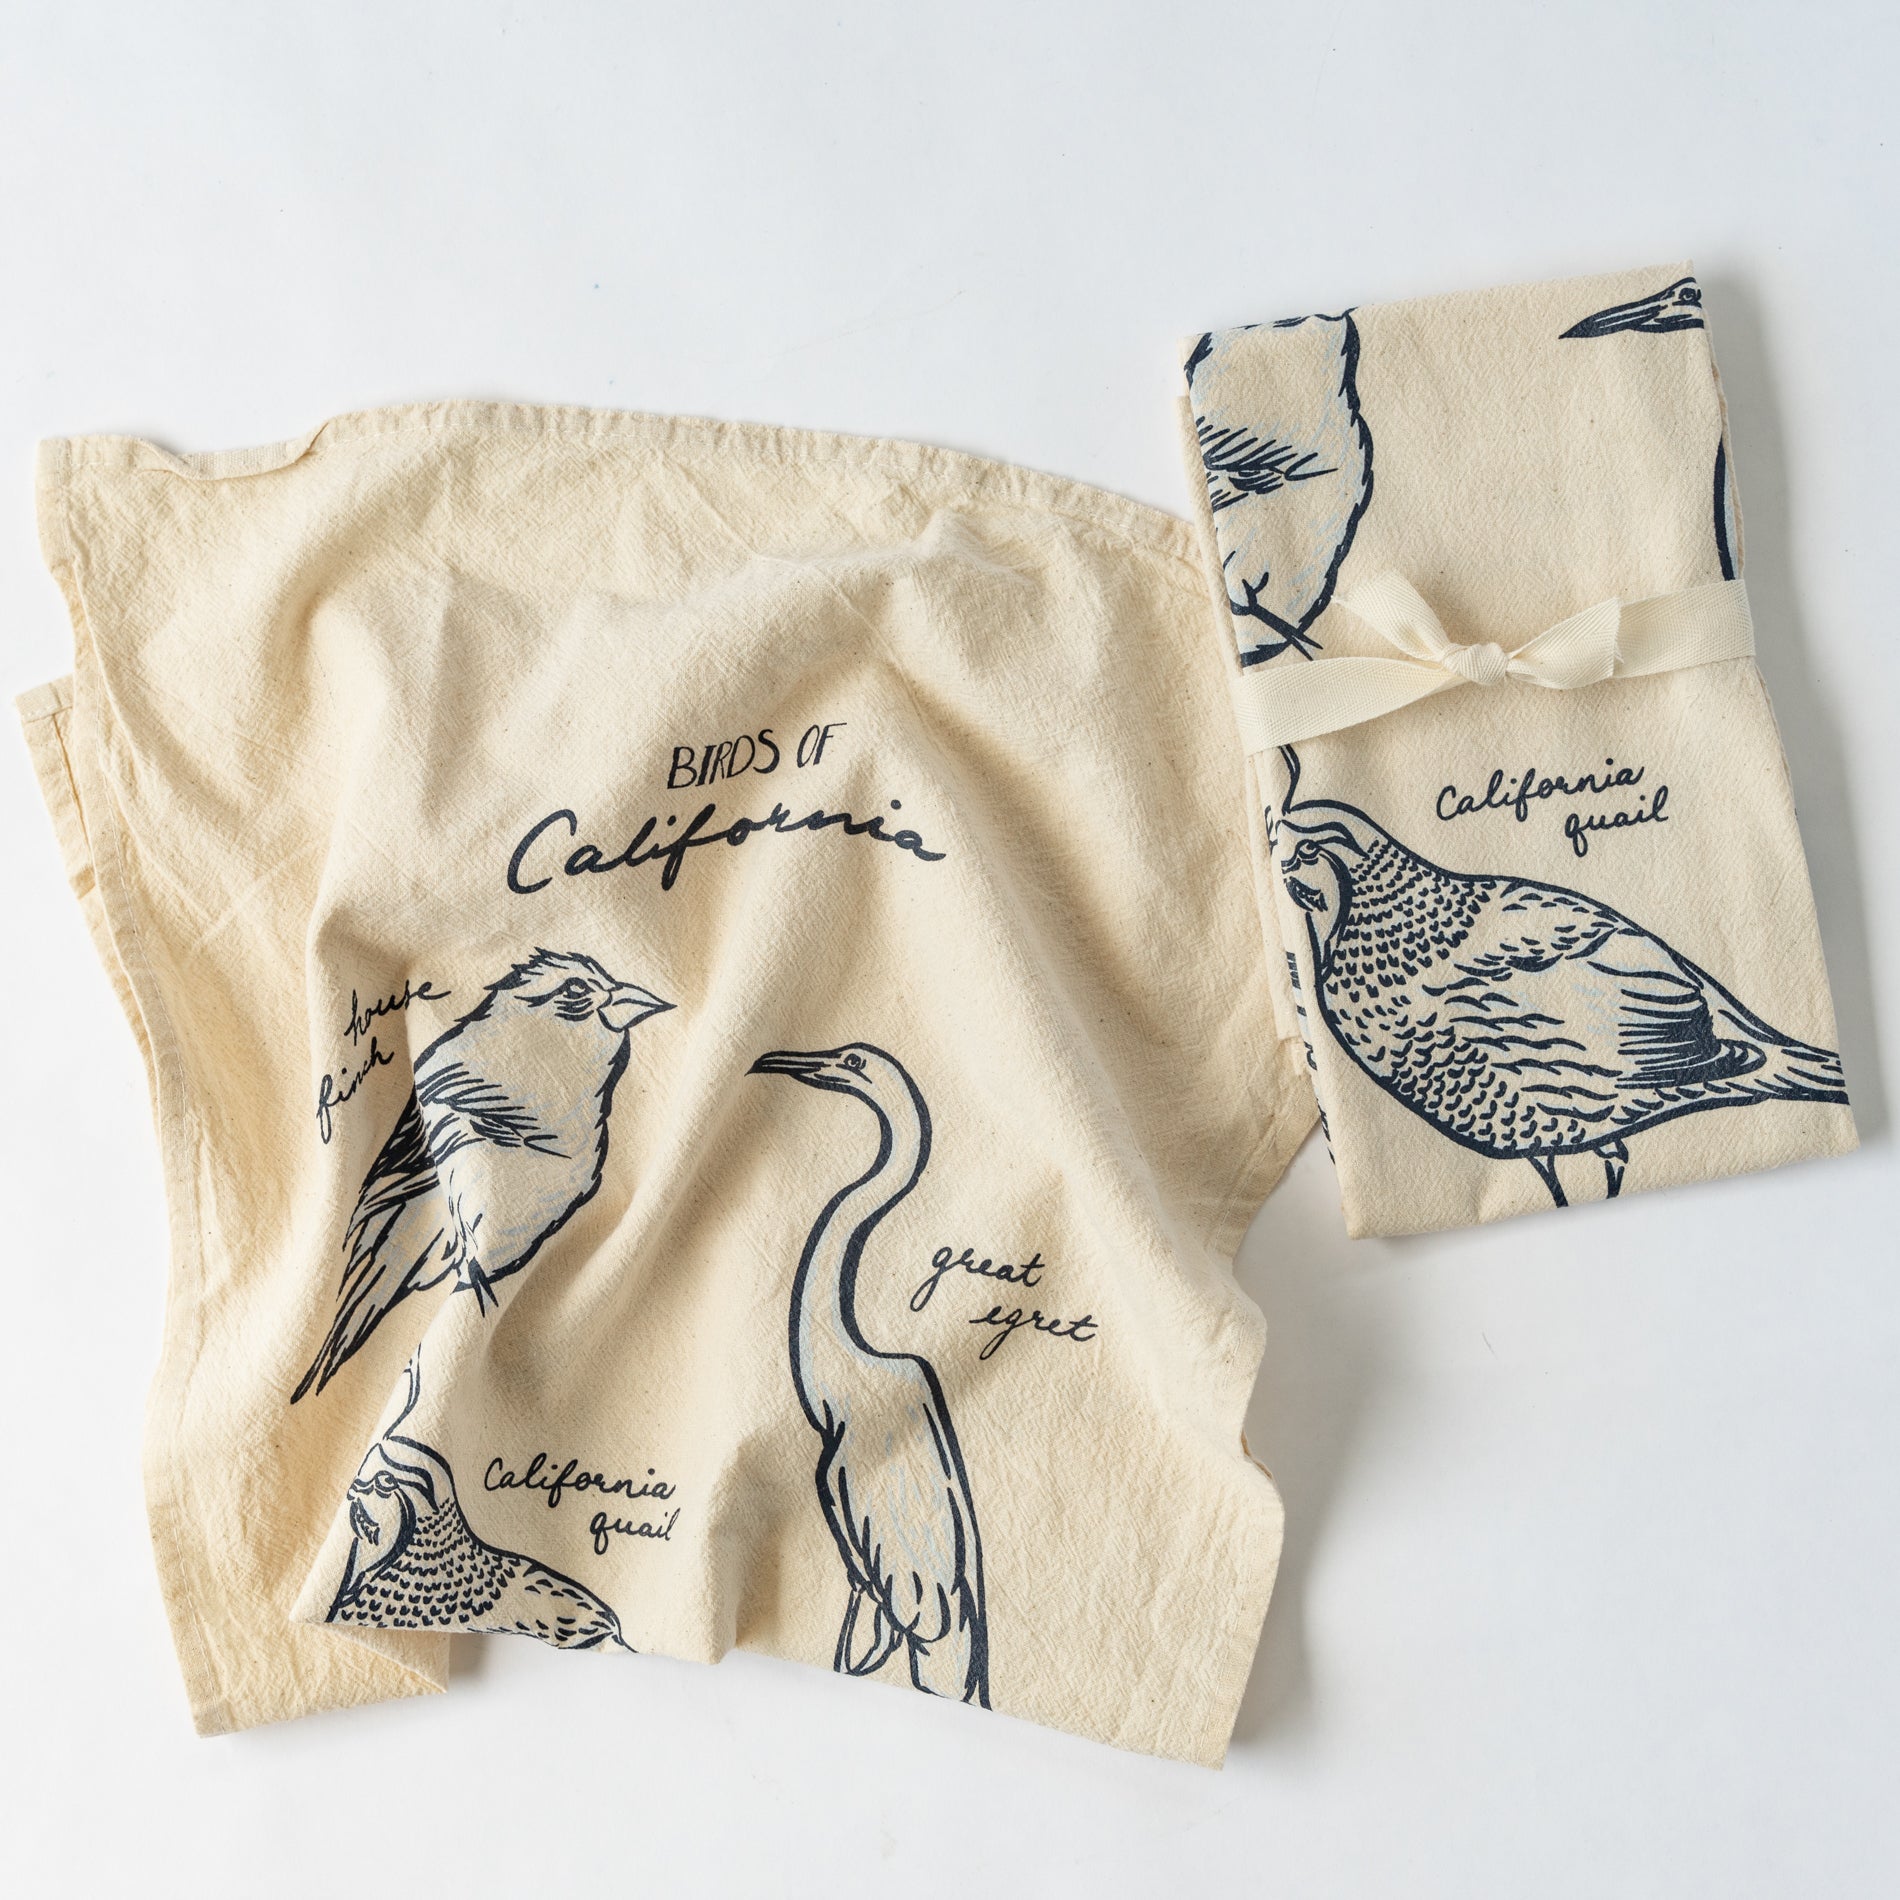 Two cream colored towels with bird illustrations against a white background